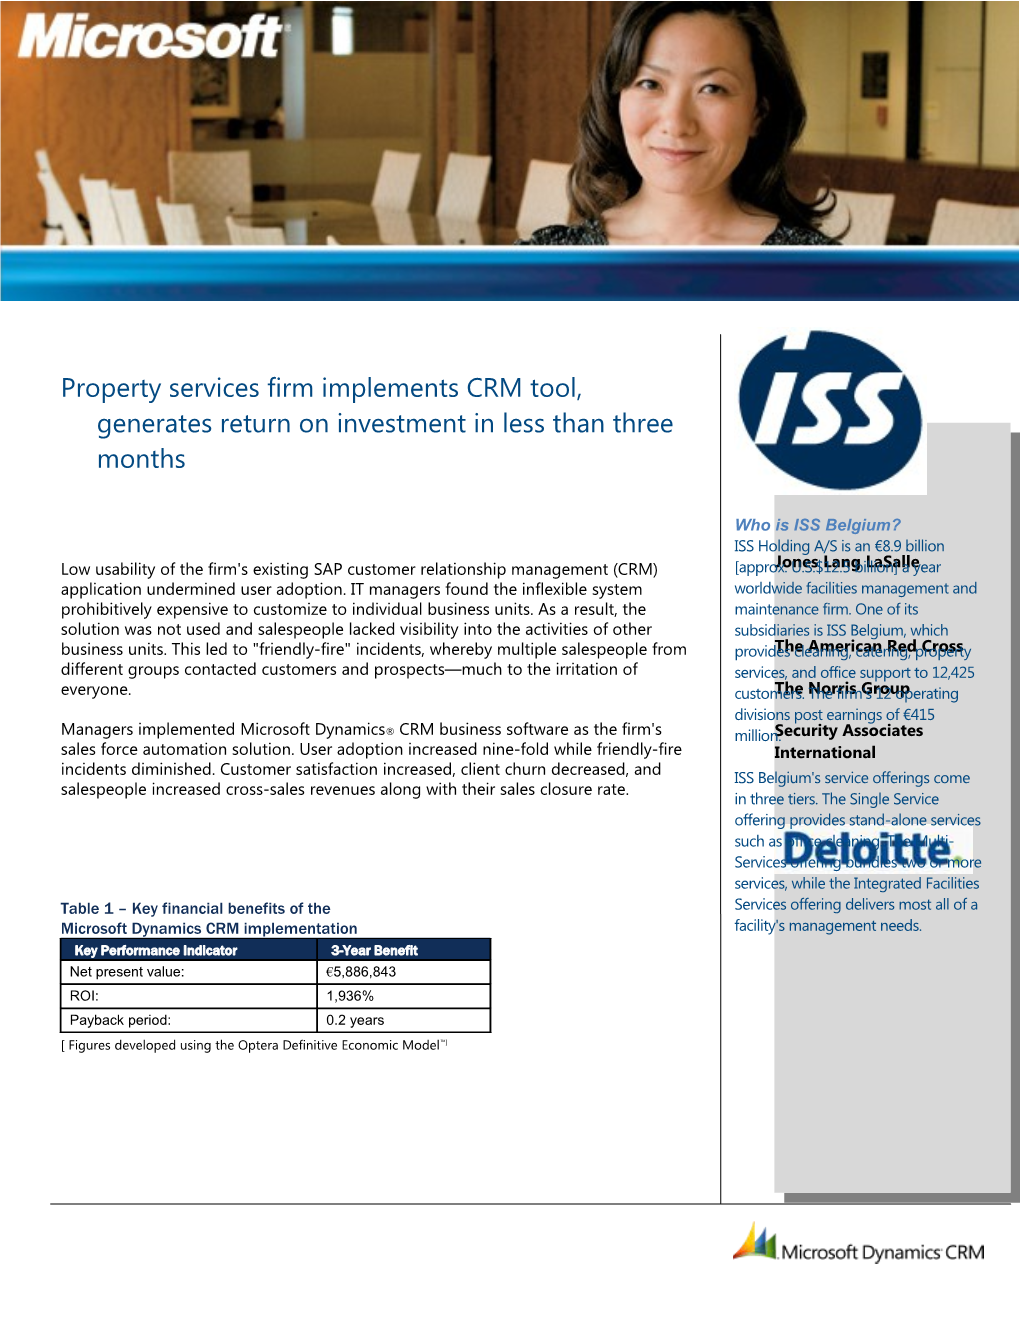 Property Services Firm Implements CRM Tool, Generates Return on Investment in Less Than